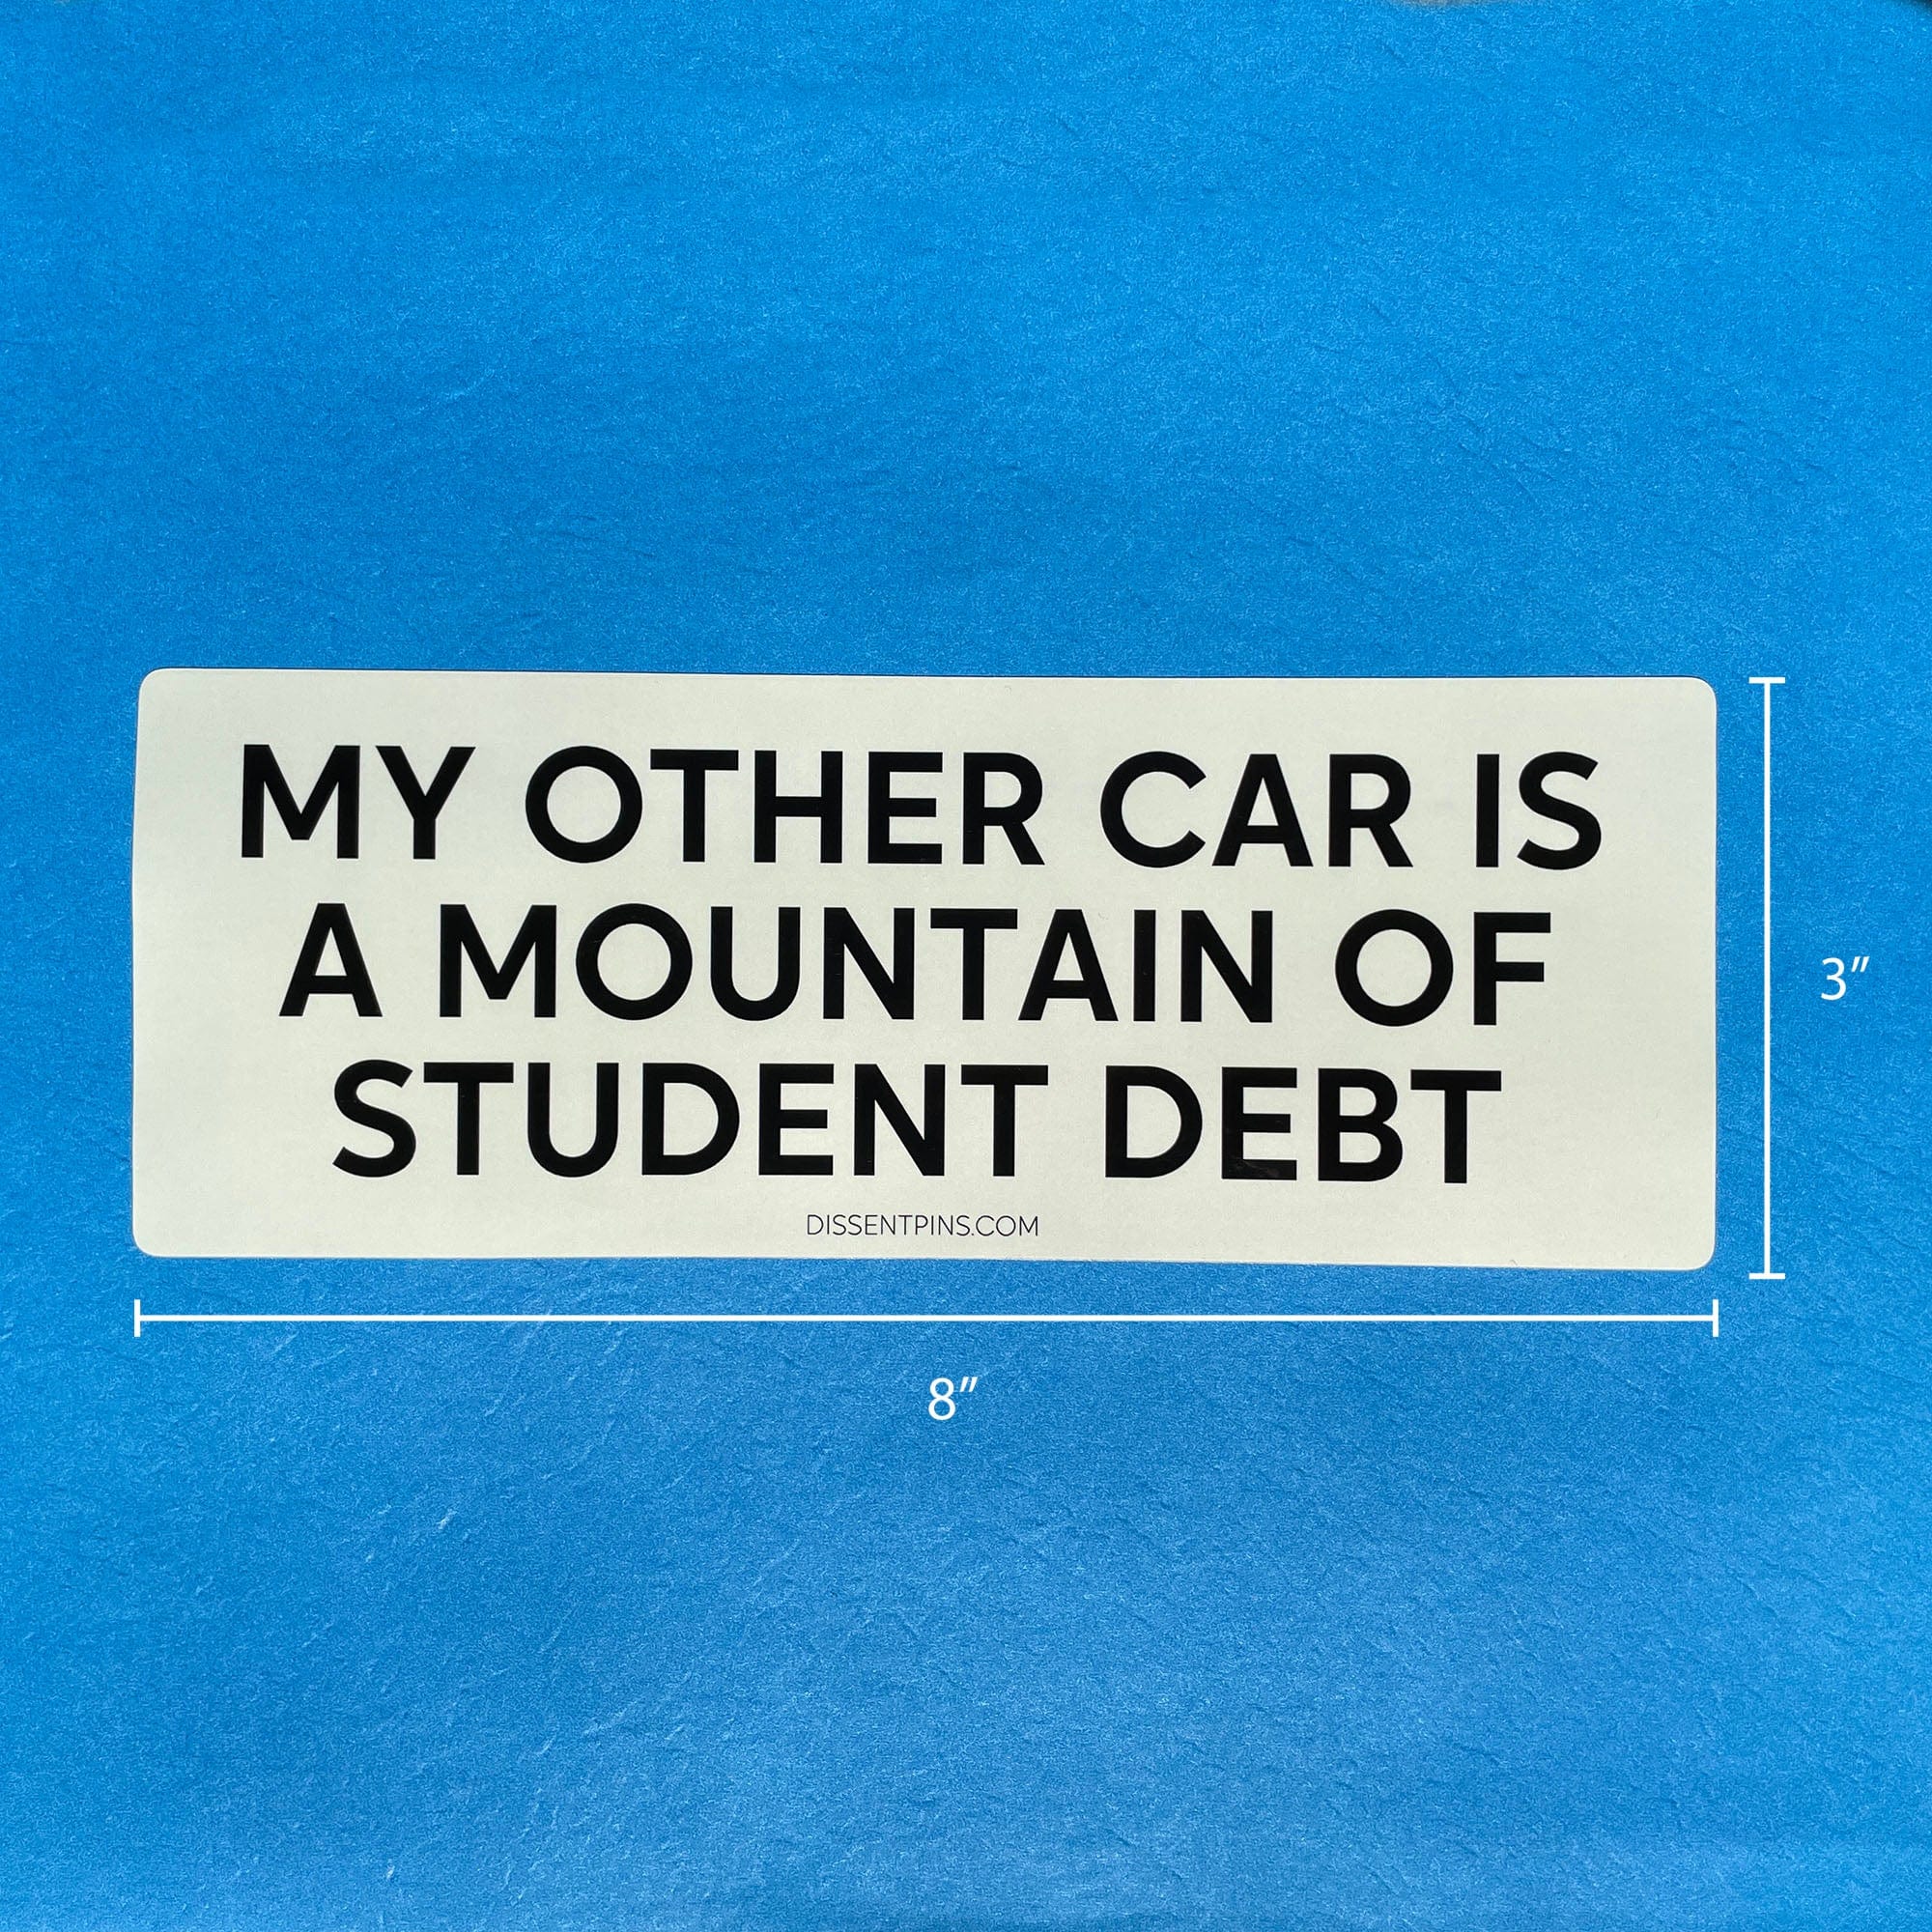 My Other Car Is a Mountain of Student Debt Sticker